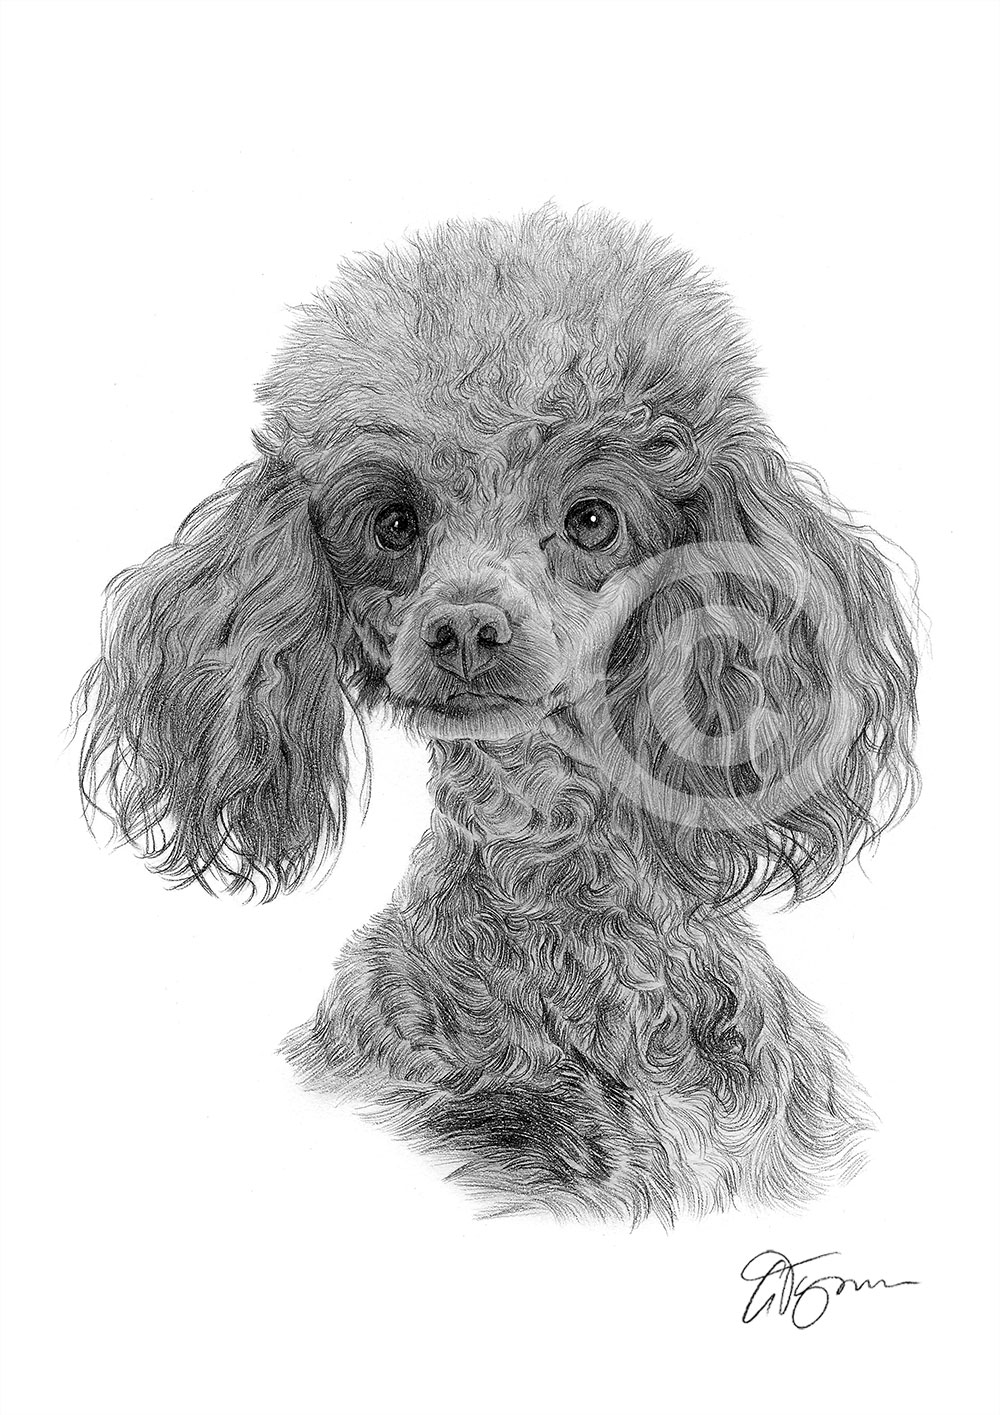 Pencil drawing of a Toy Poodle by artist Gary Tymon